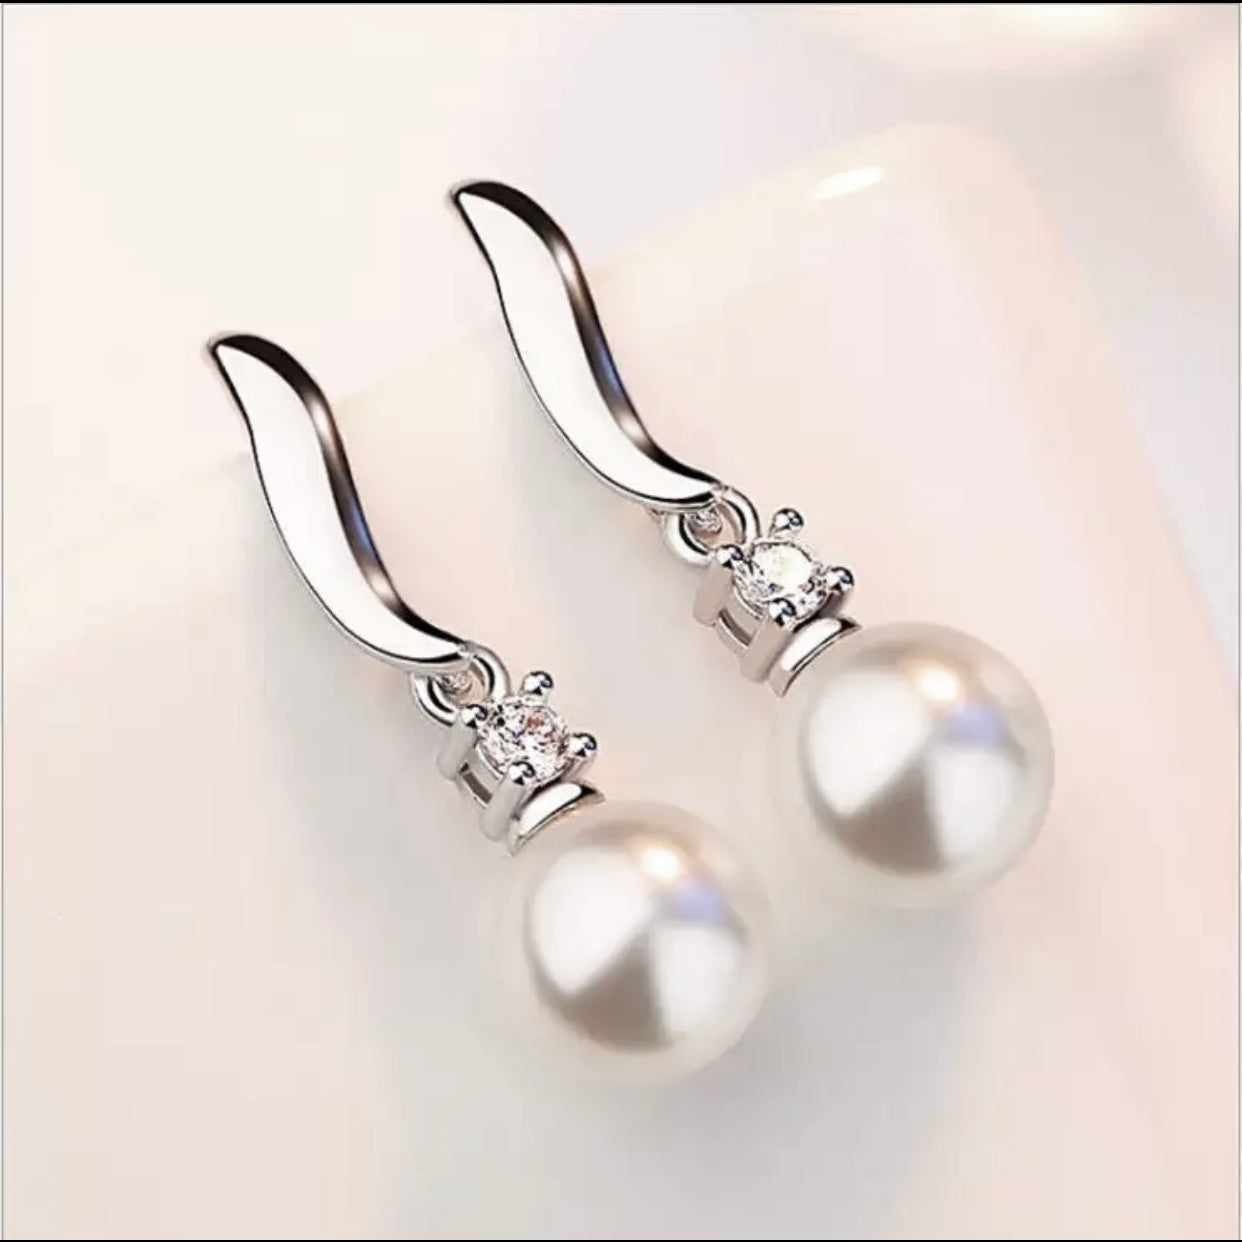 CZ Accented White Pearl Drop Earring